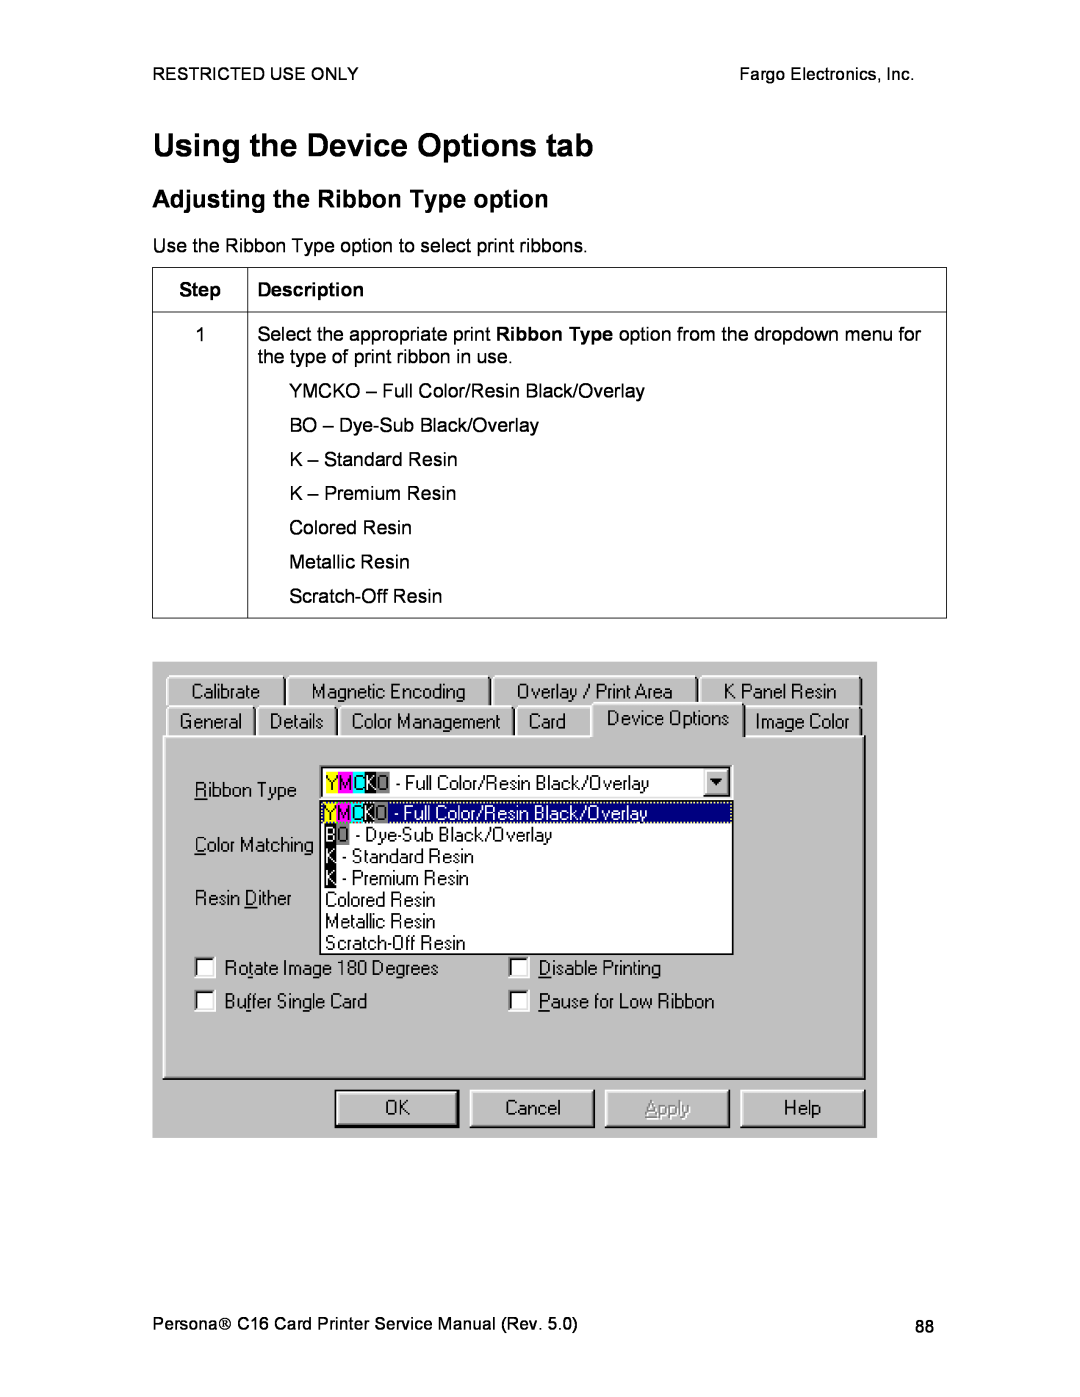 FARGO electronic C16 service manual Using the Device Options tab, Adjusting the Ribbon Type option 